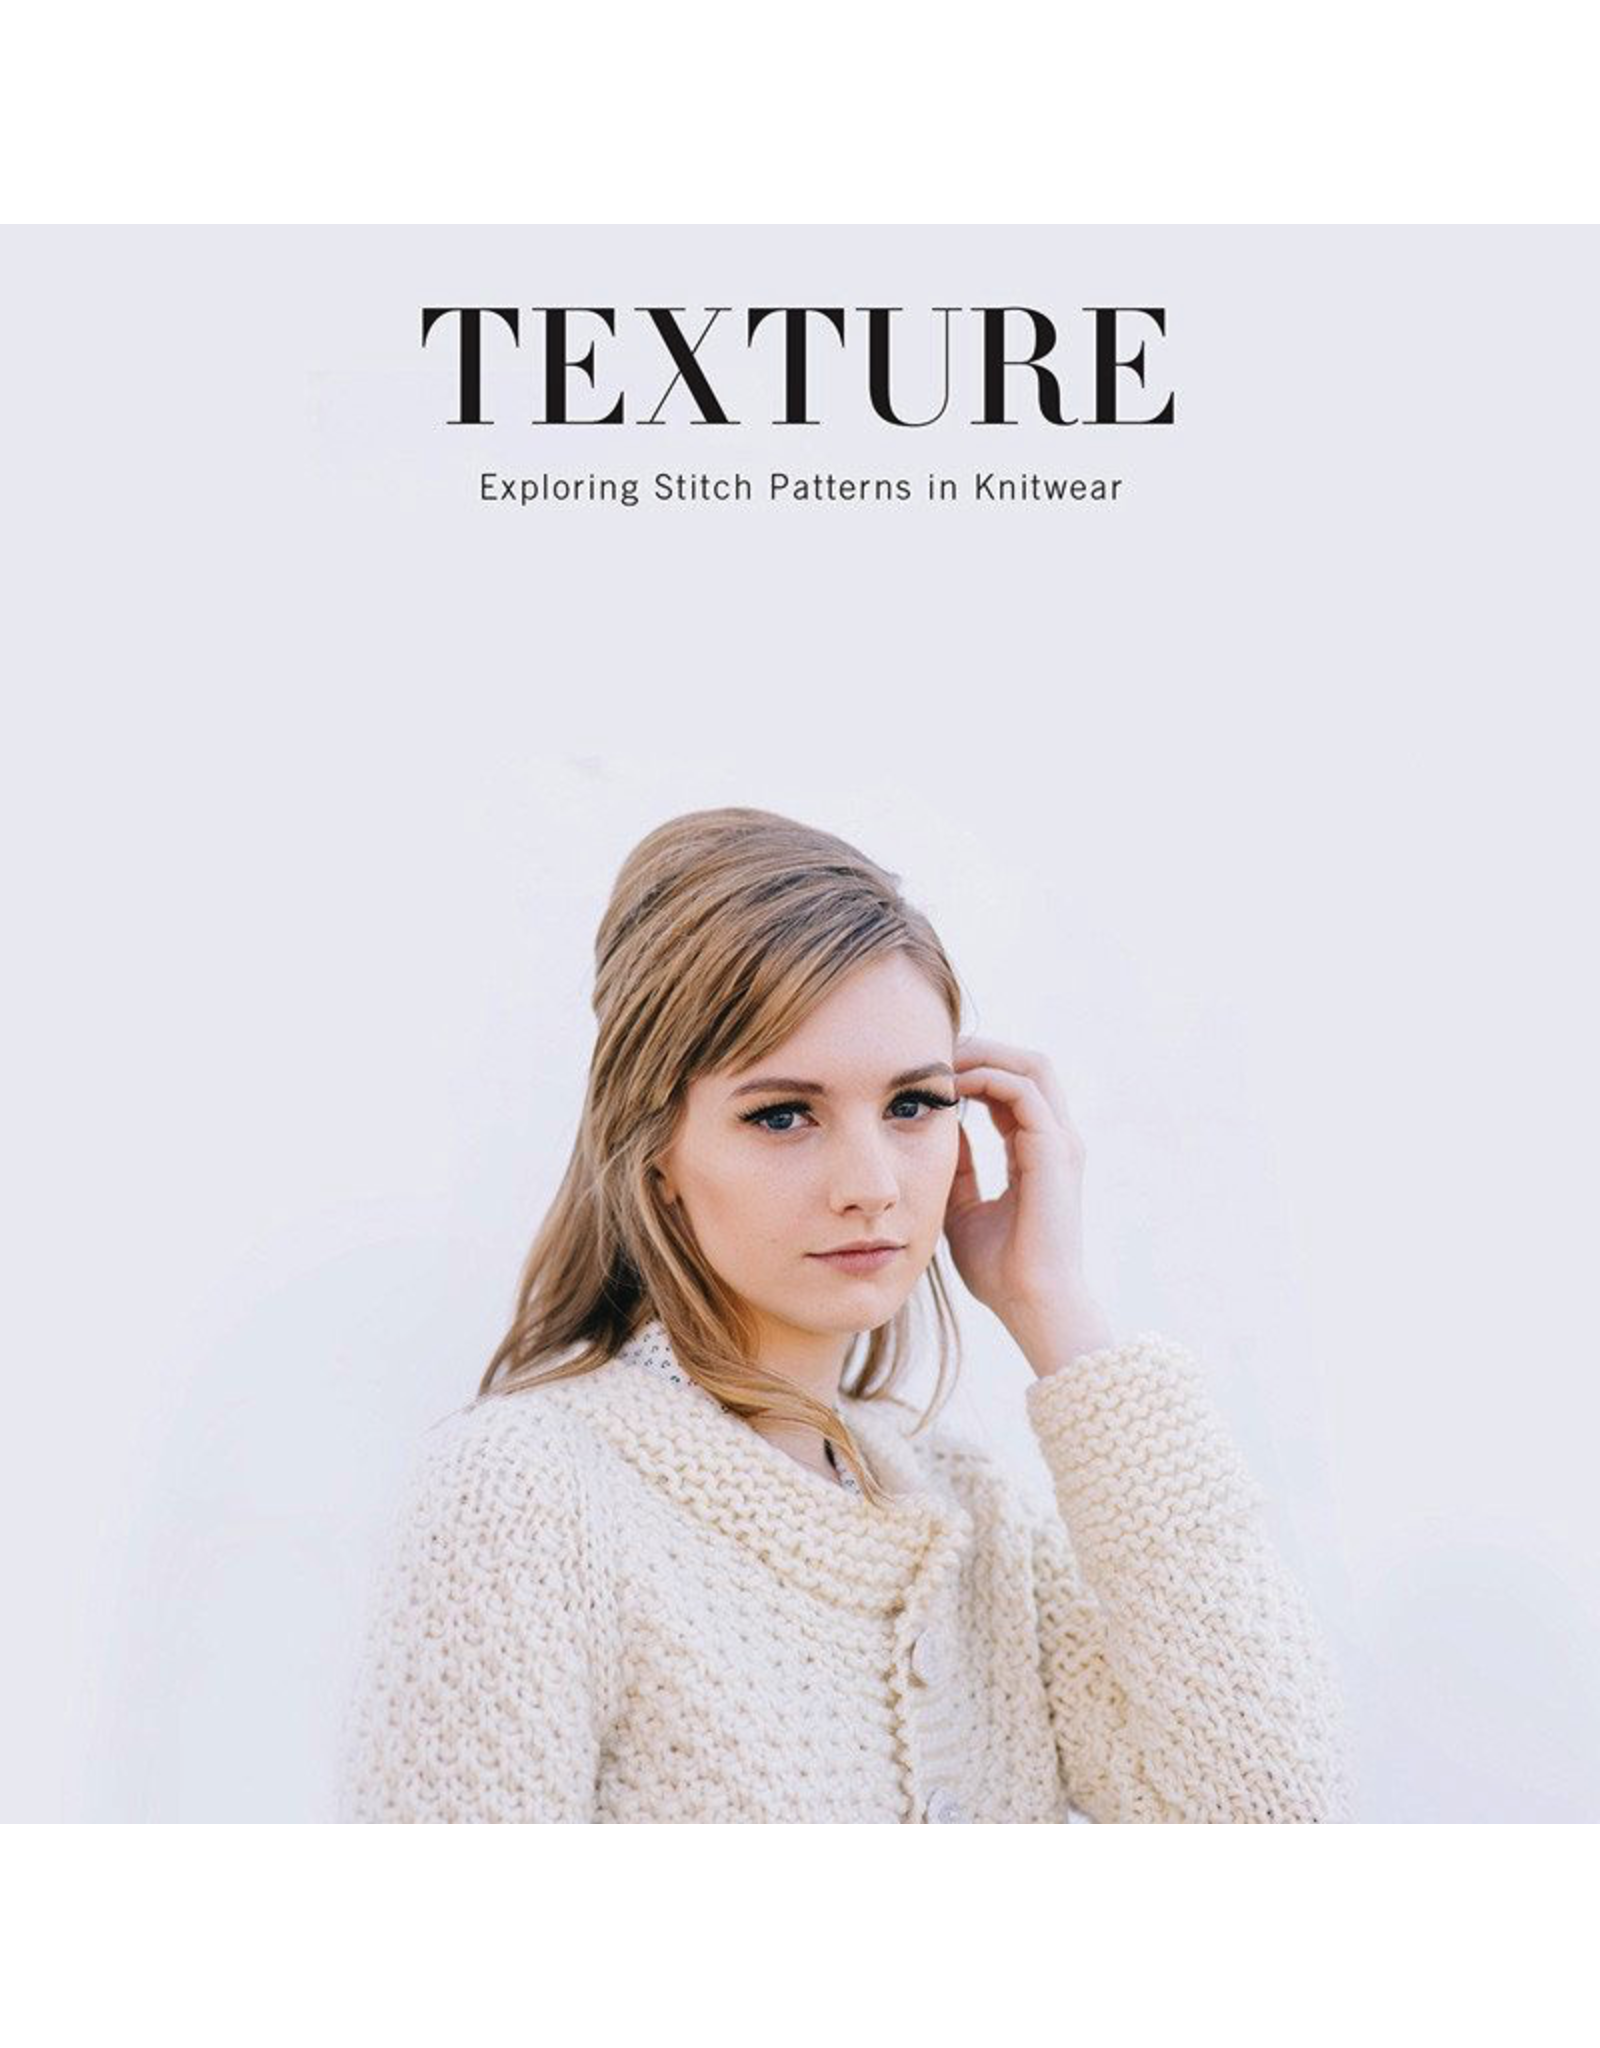 Texture: Exploring Stitch Patterns in Knitwear